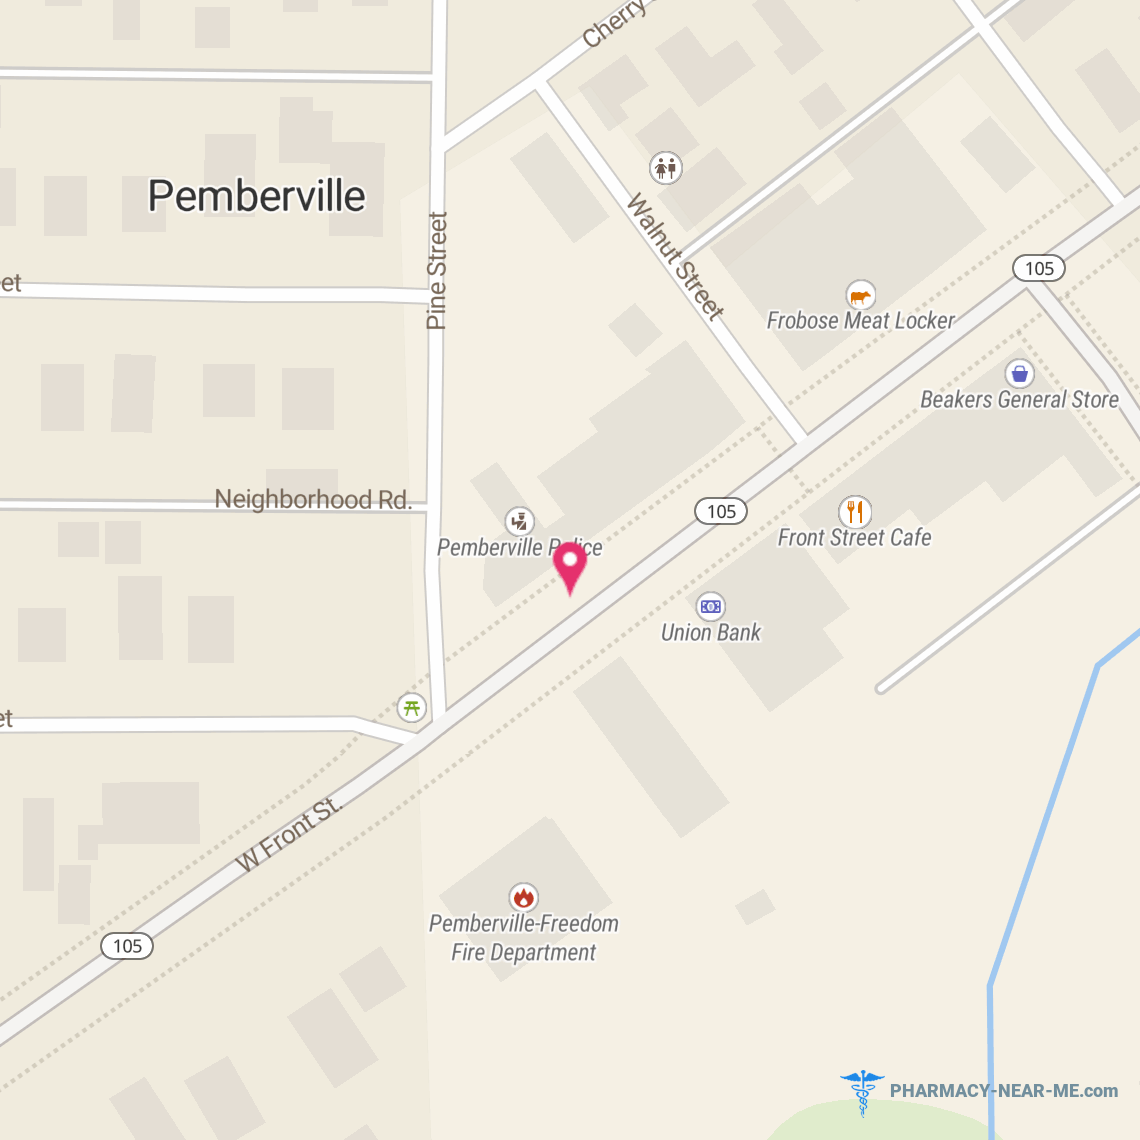 PEMBERVILLE DRUG STORE - Pharmacy Hours, Phone, Reviews & Information: 143 East Front Street, Pemberville, Ohio 43450, United States